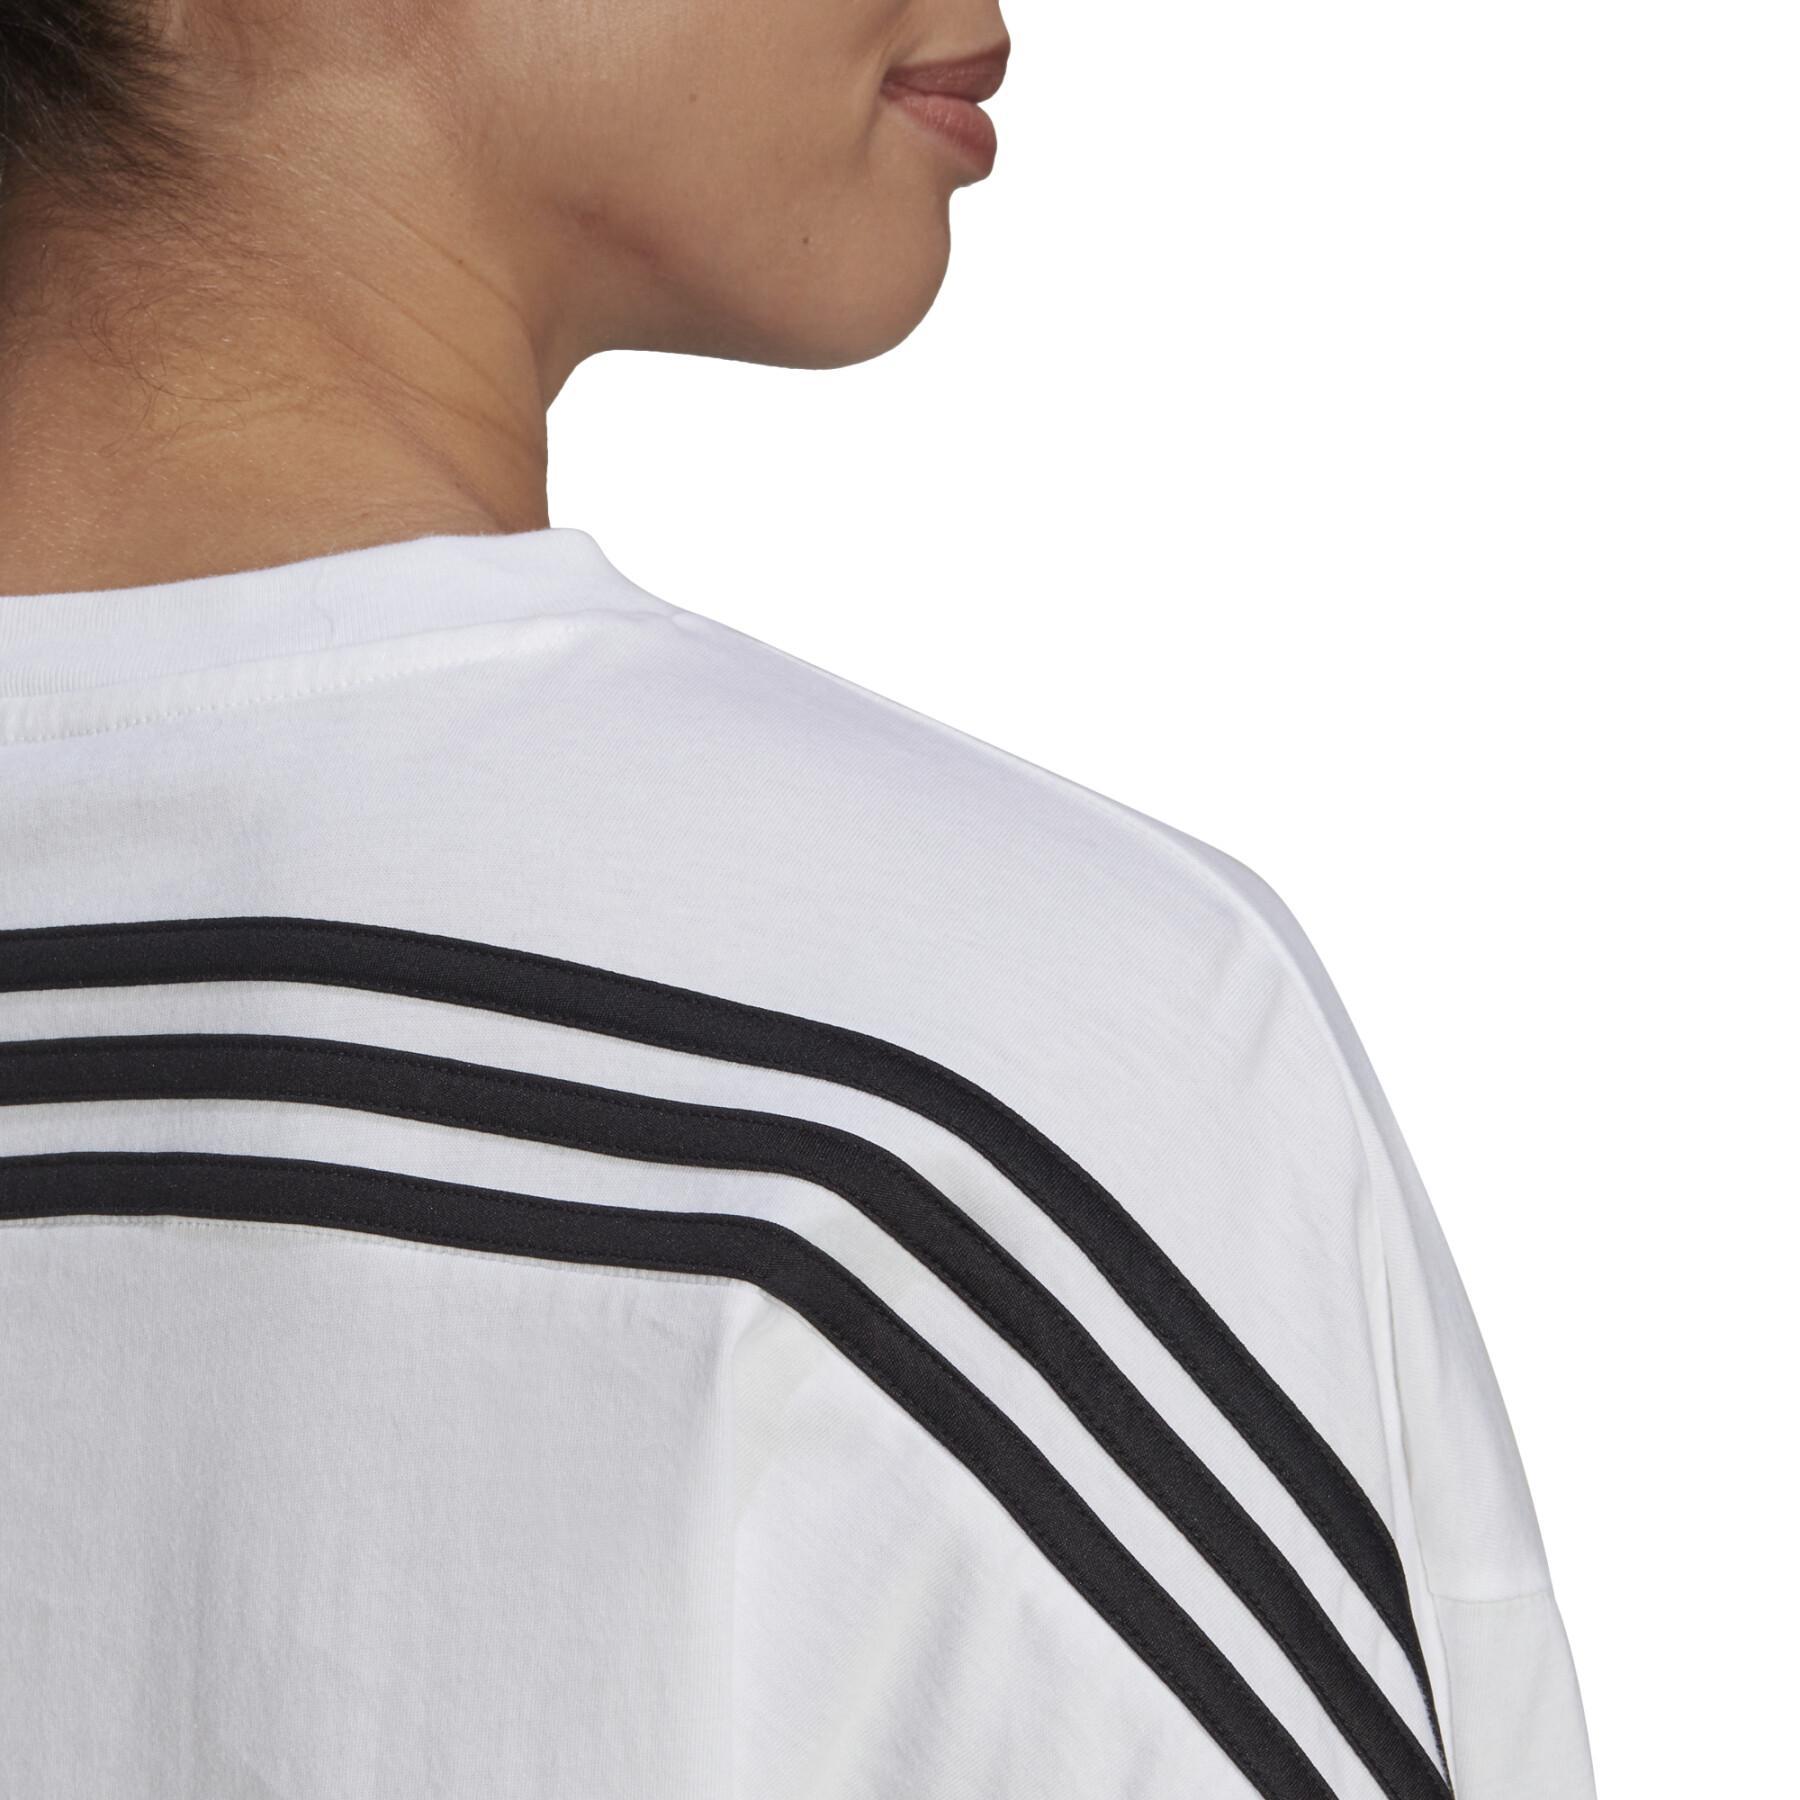 Maillot de mujer adidas future icons 3-stripes